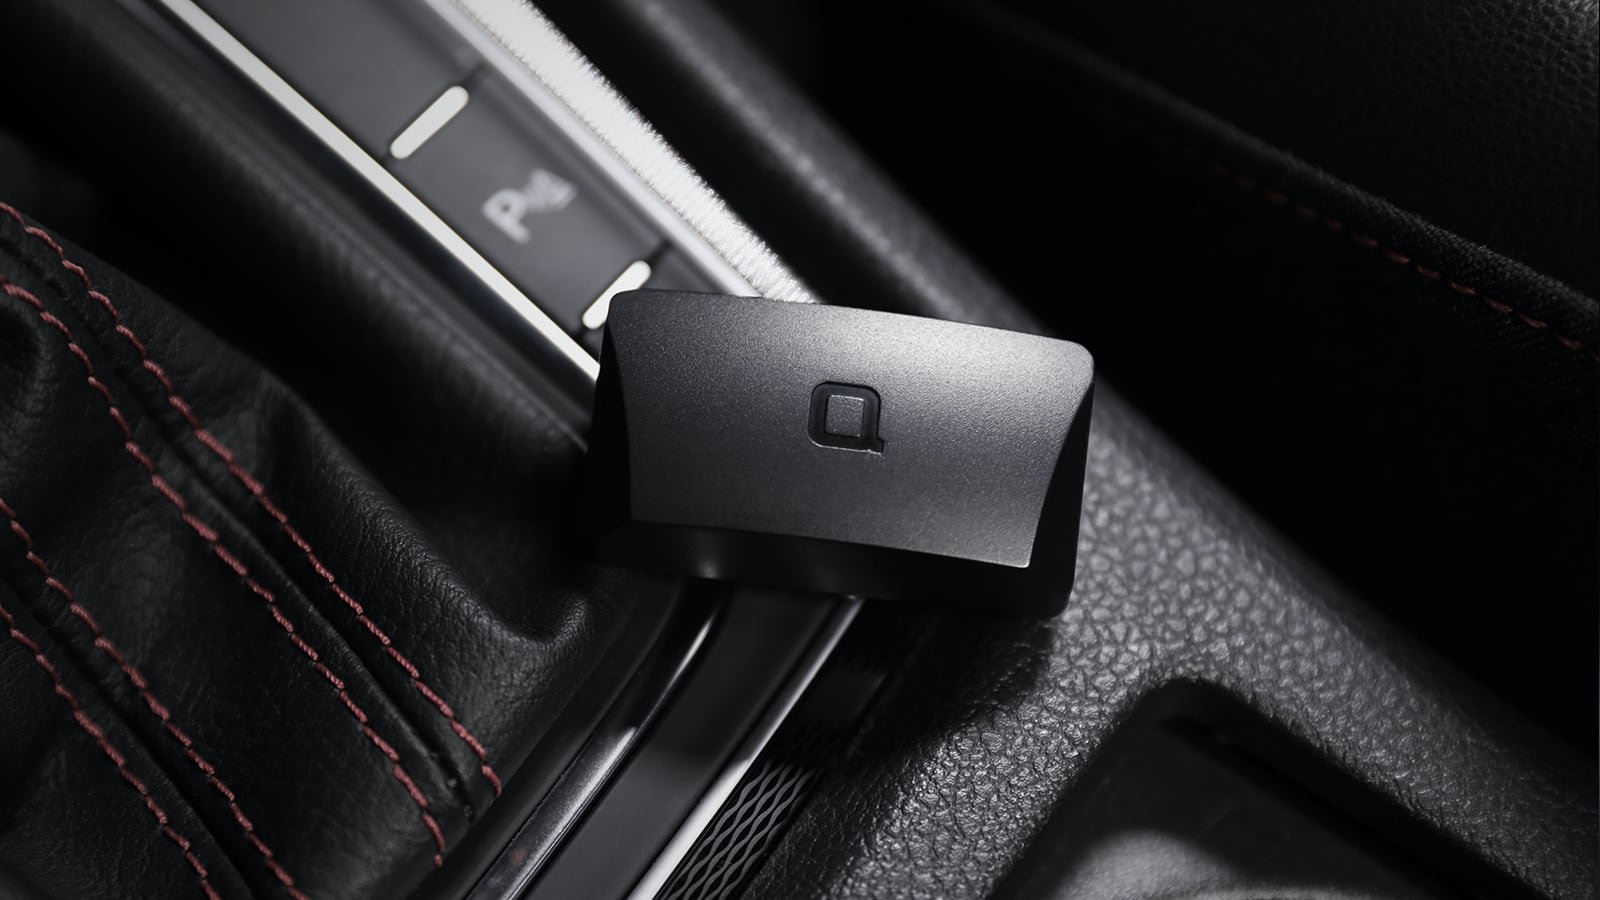 Nonda ZUS Smart Vehicle Health Monitor Mini gives you a full overview of your car’s health